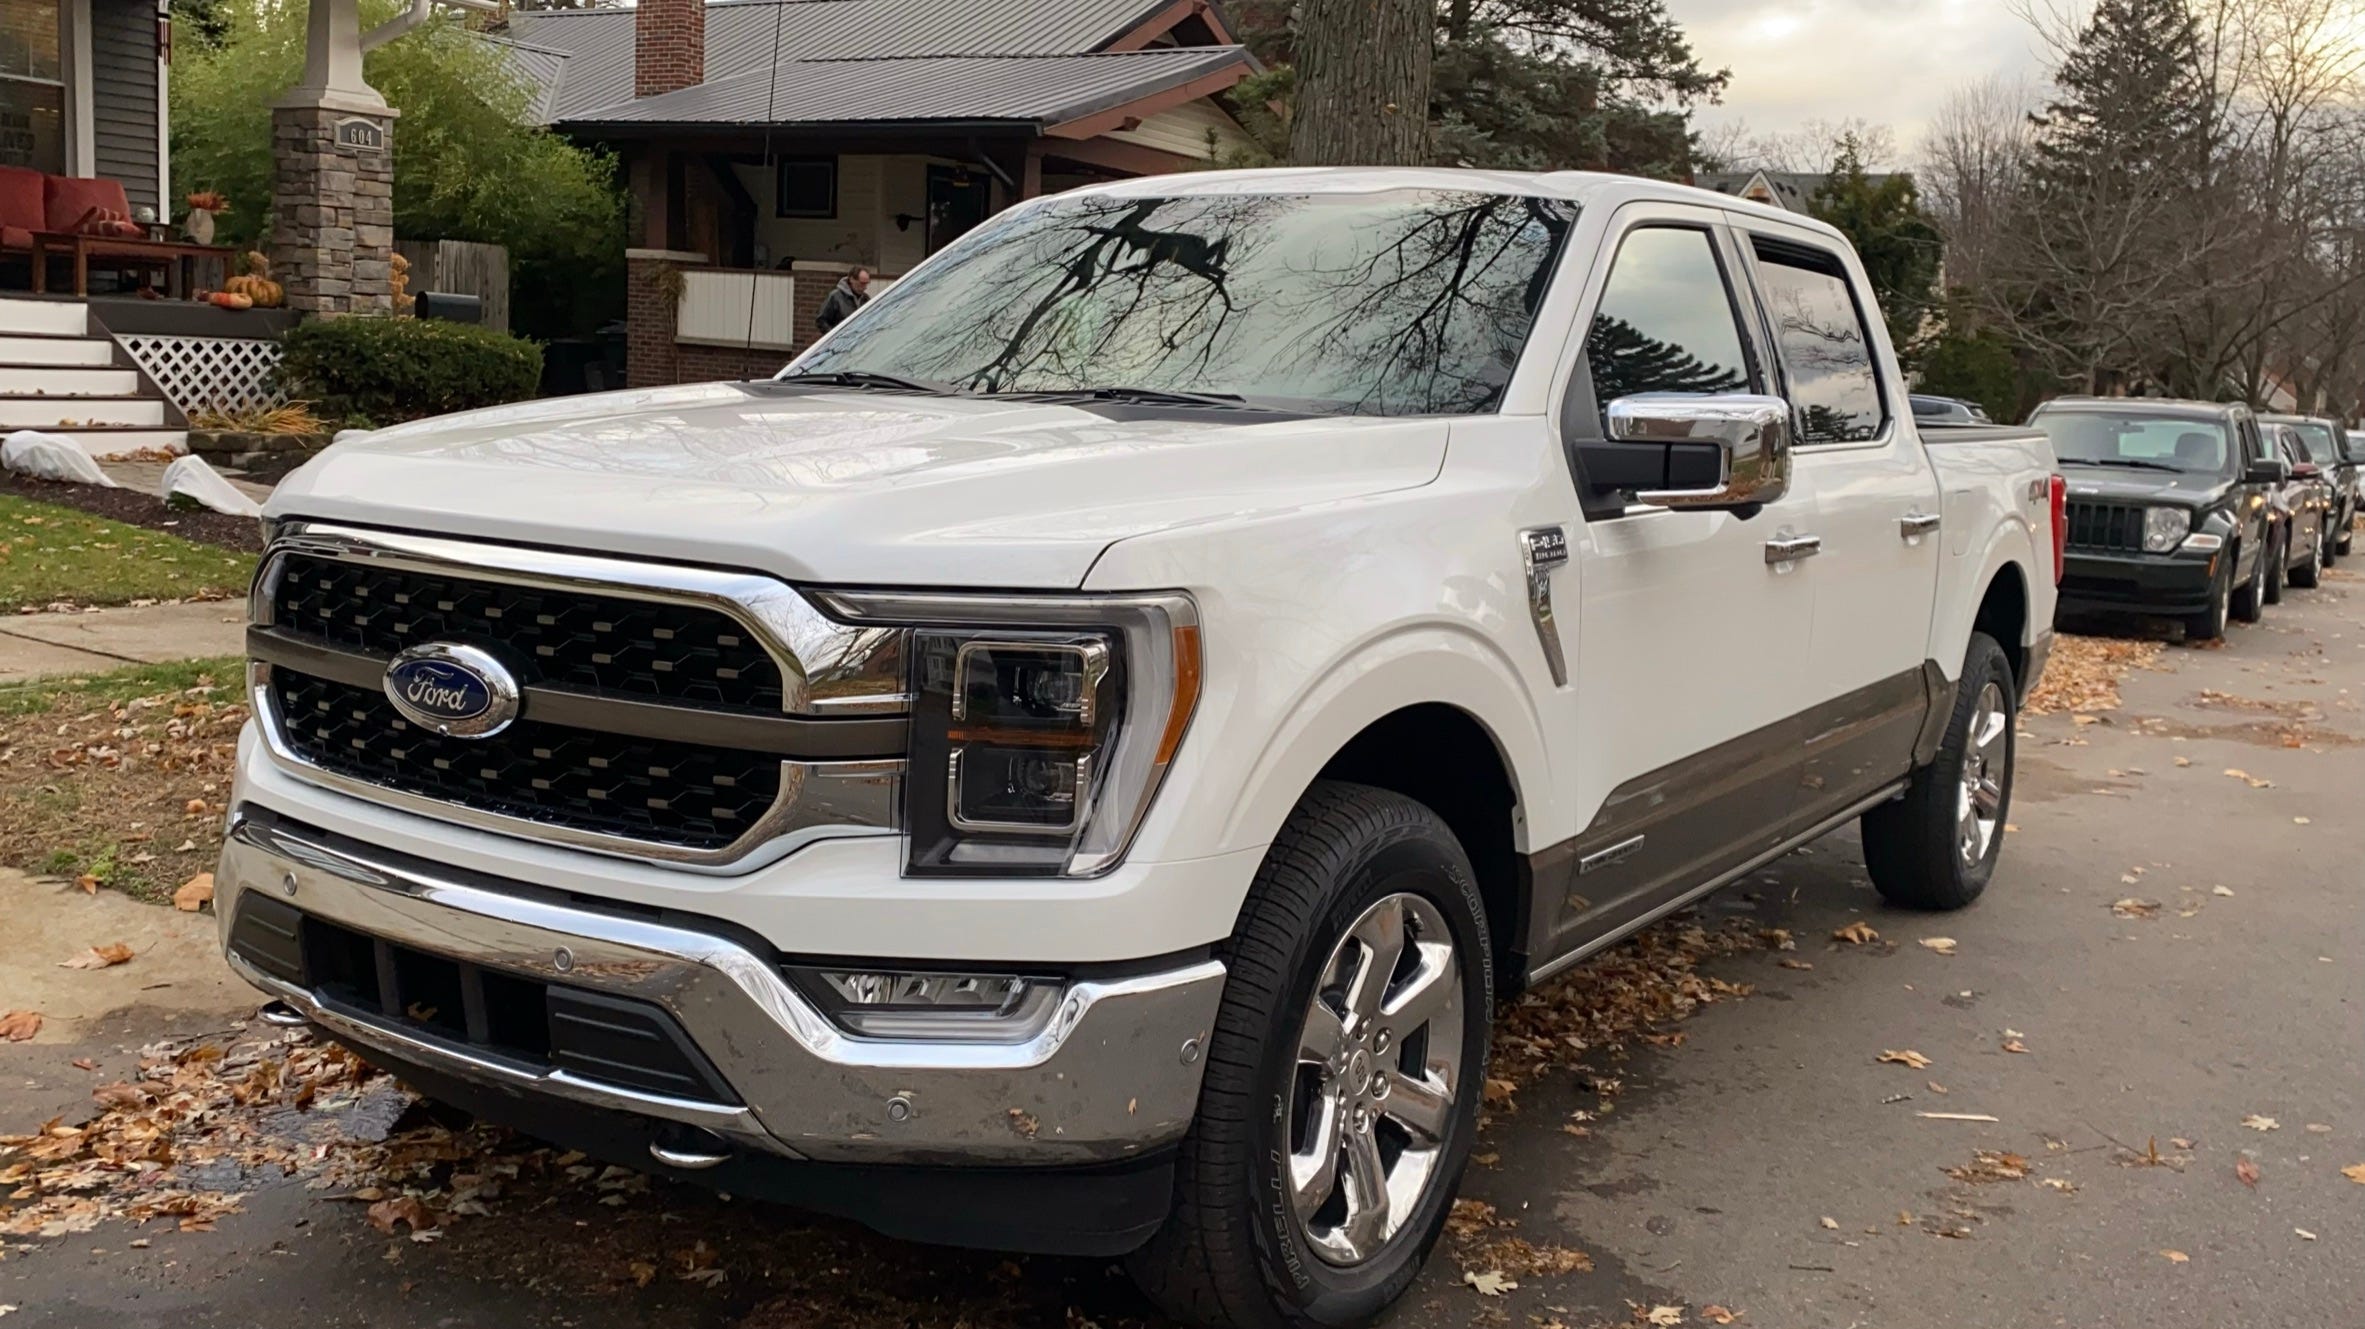 Customers Await Limited Supply Of 2021 Ford F 150s Arriving At Dealerships